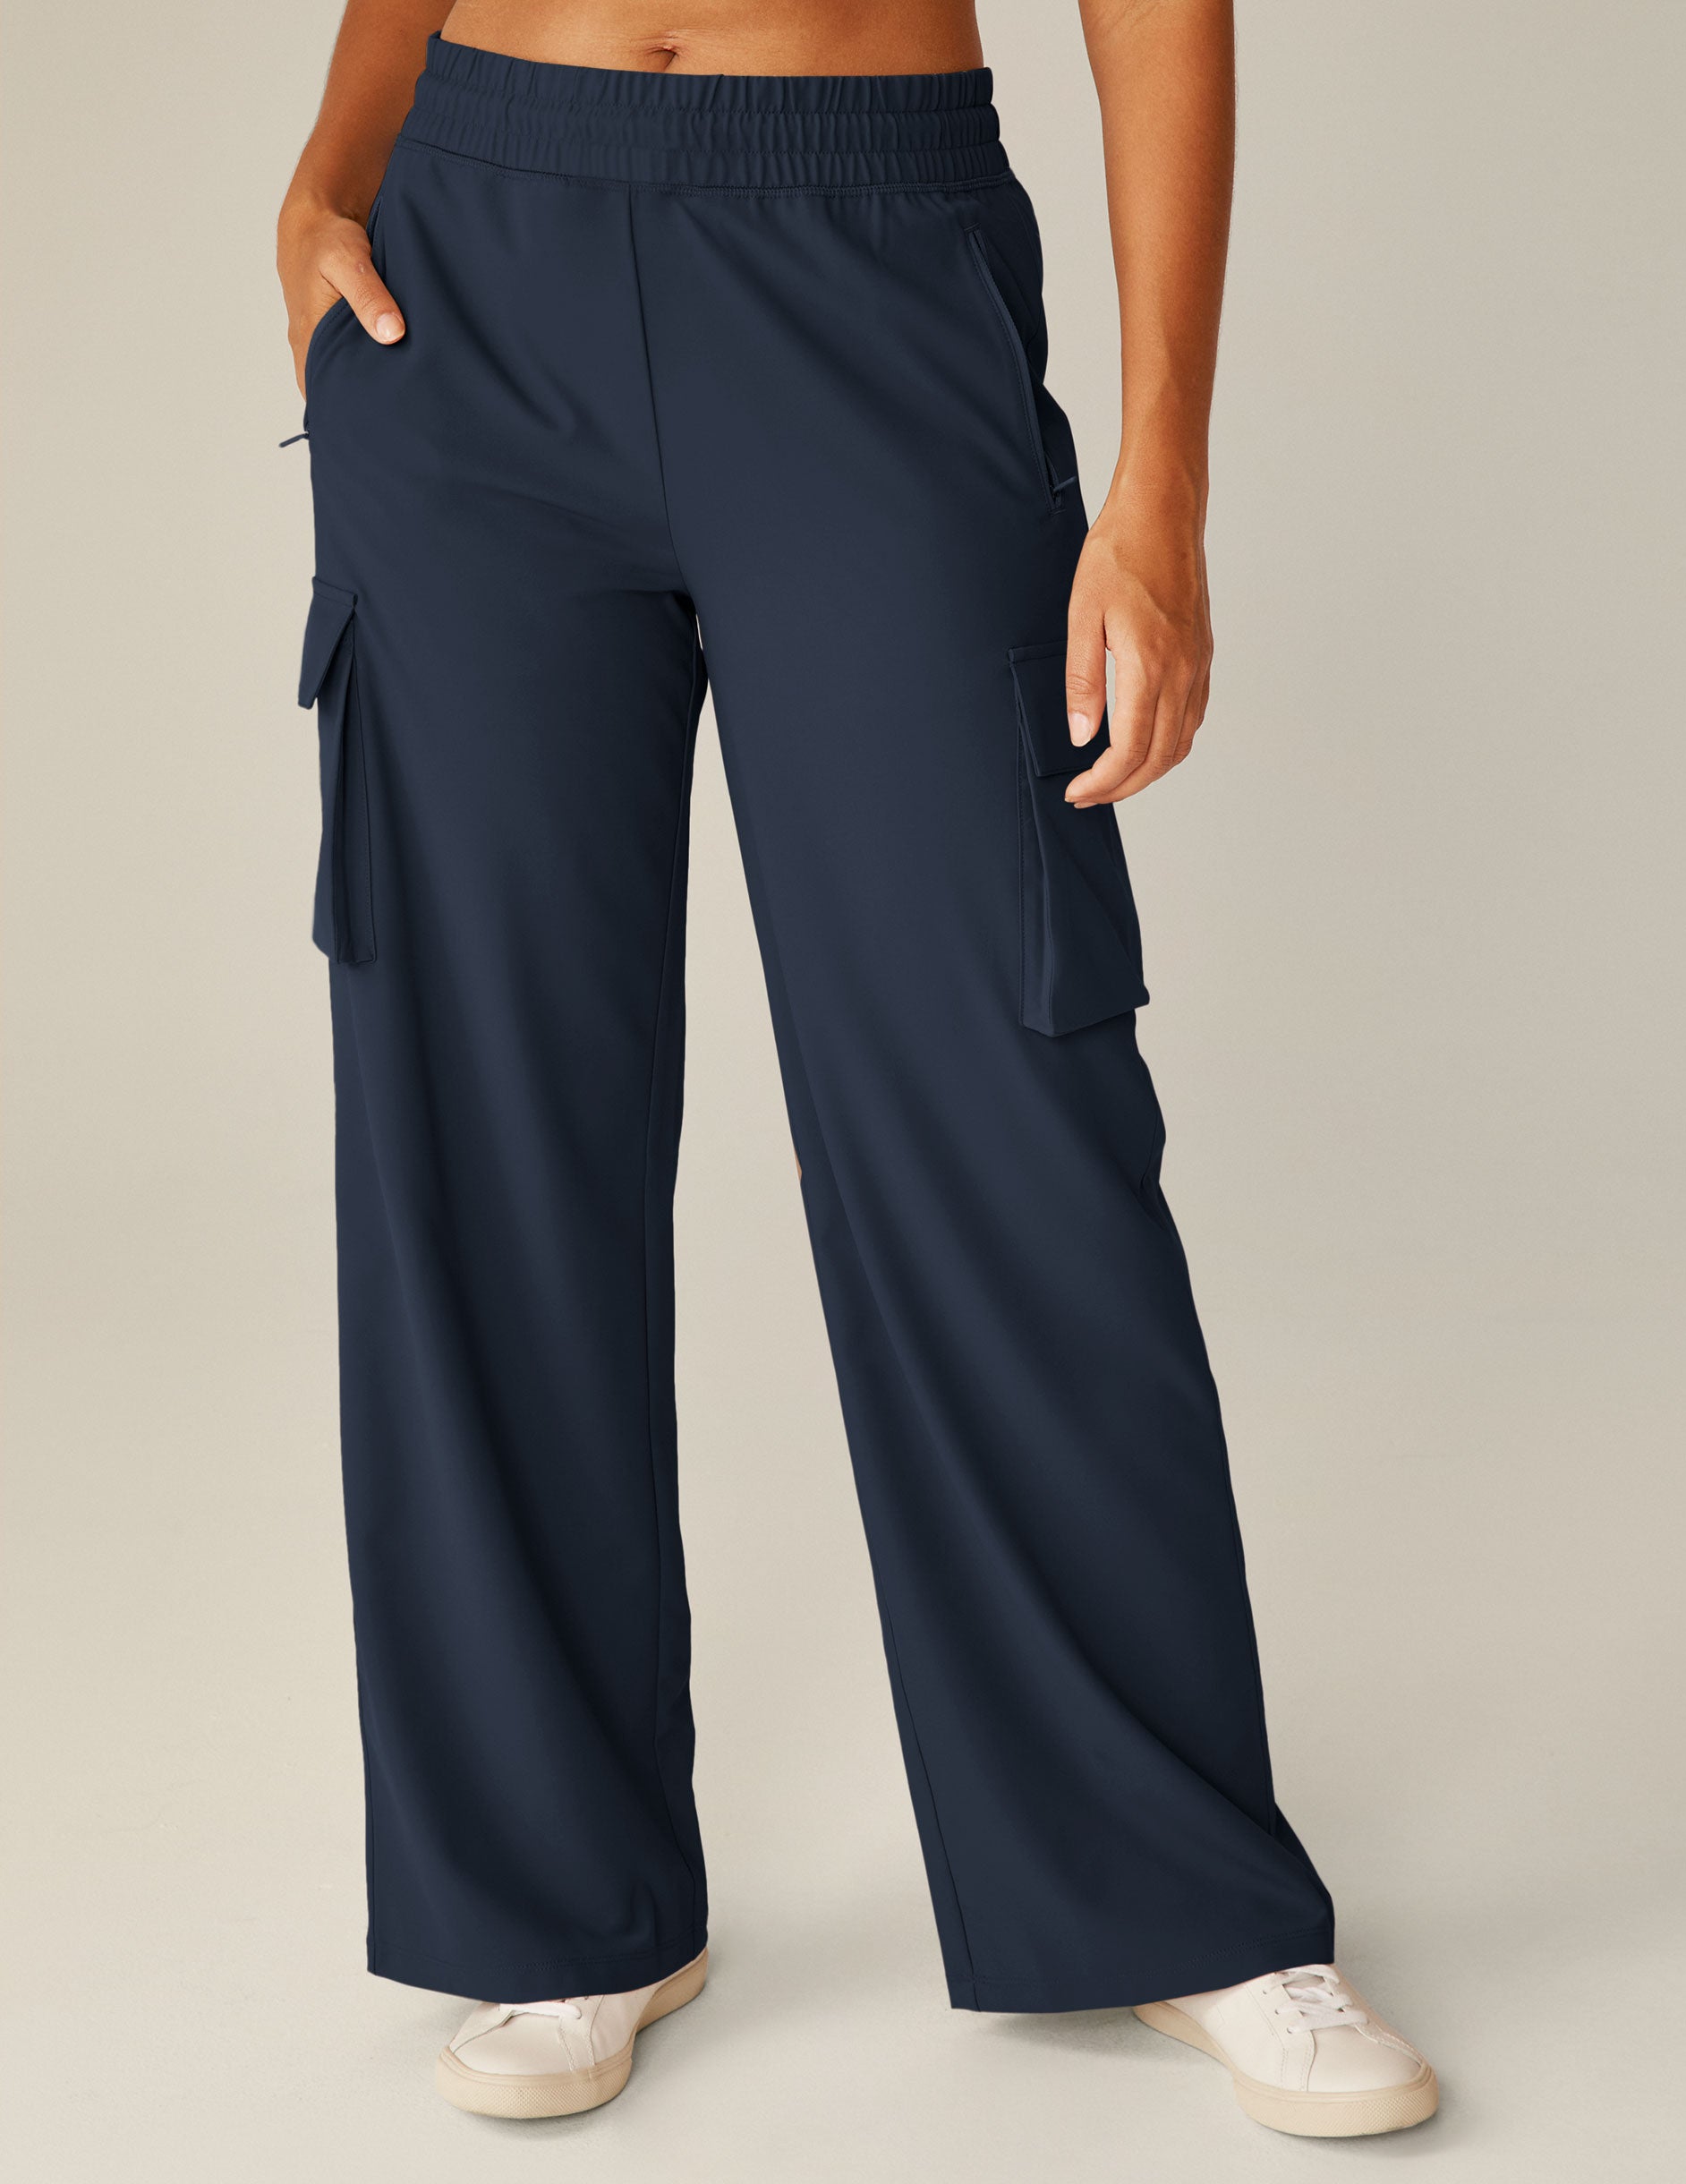 blue cargo style pants with pockets. 